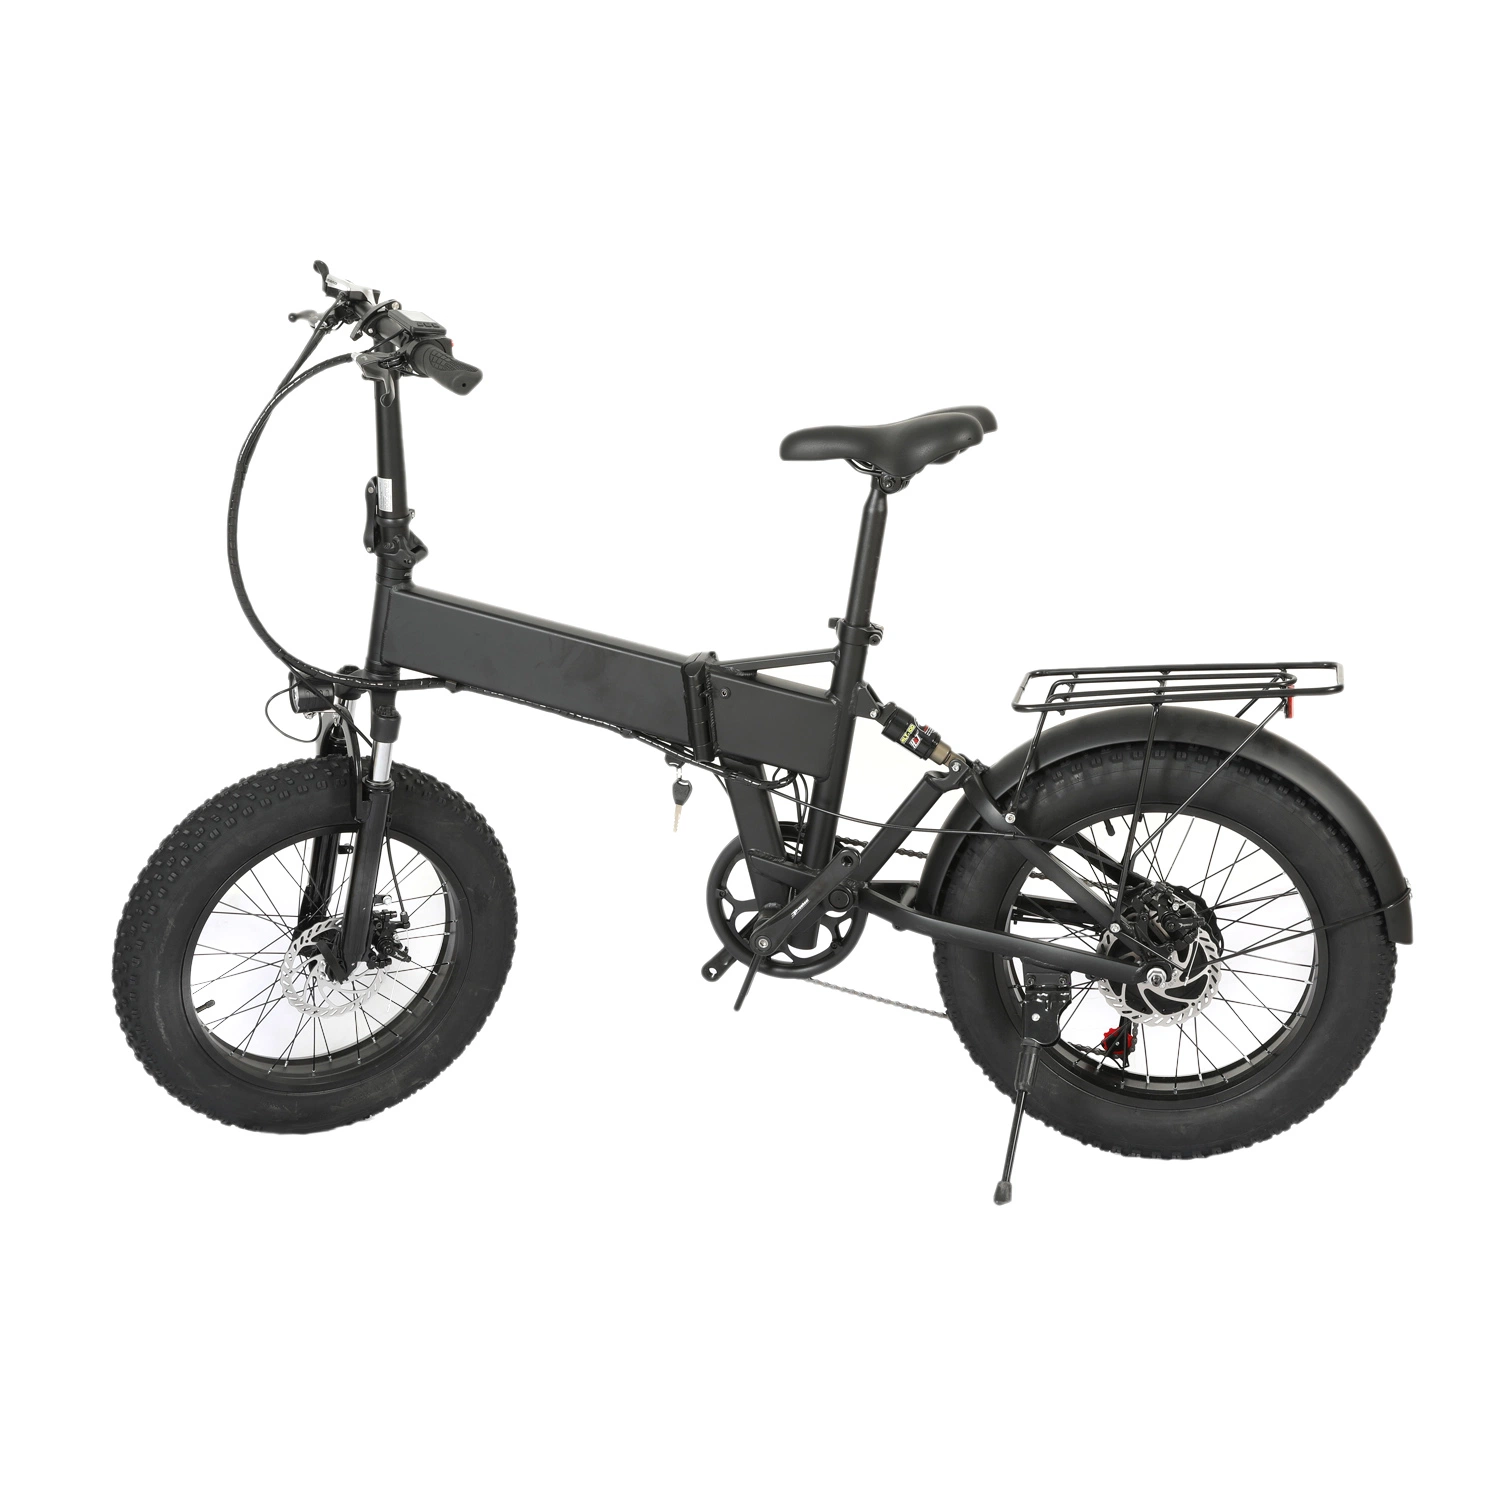 20" Motorcycle Electric Scooter Bicycle Electric Bike Electric Motorcycle Scooter Motor Scooter with 500W Motor Brushless 48V 10ah Battery Electirc Fat Bike